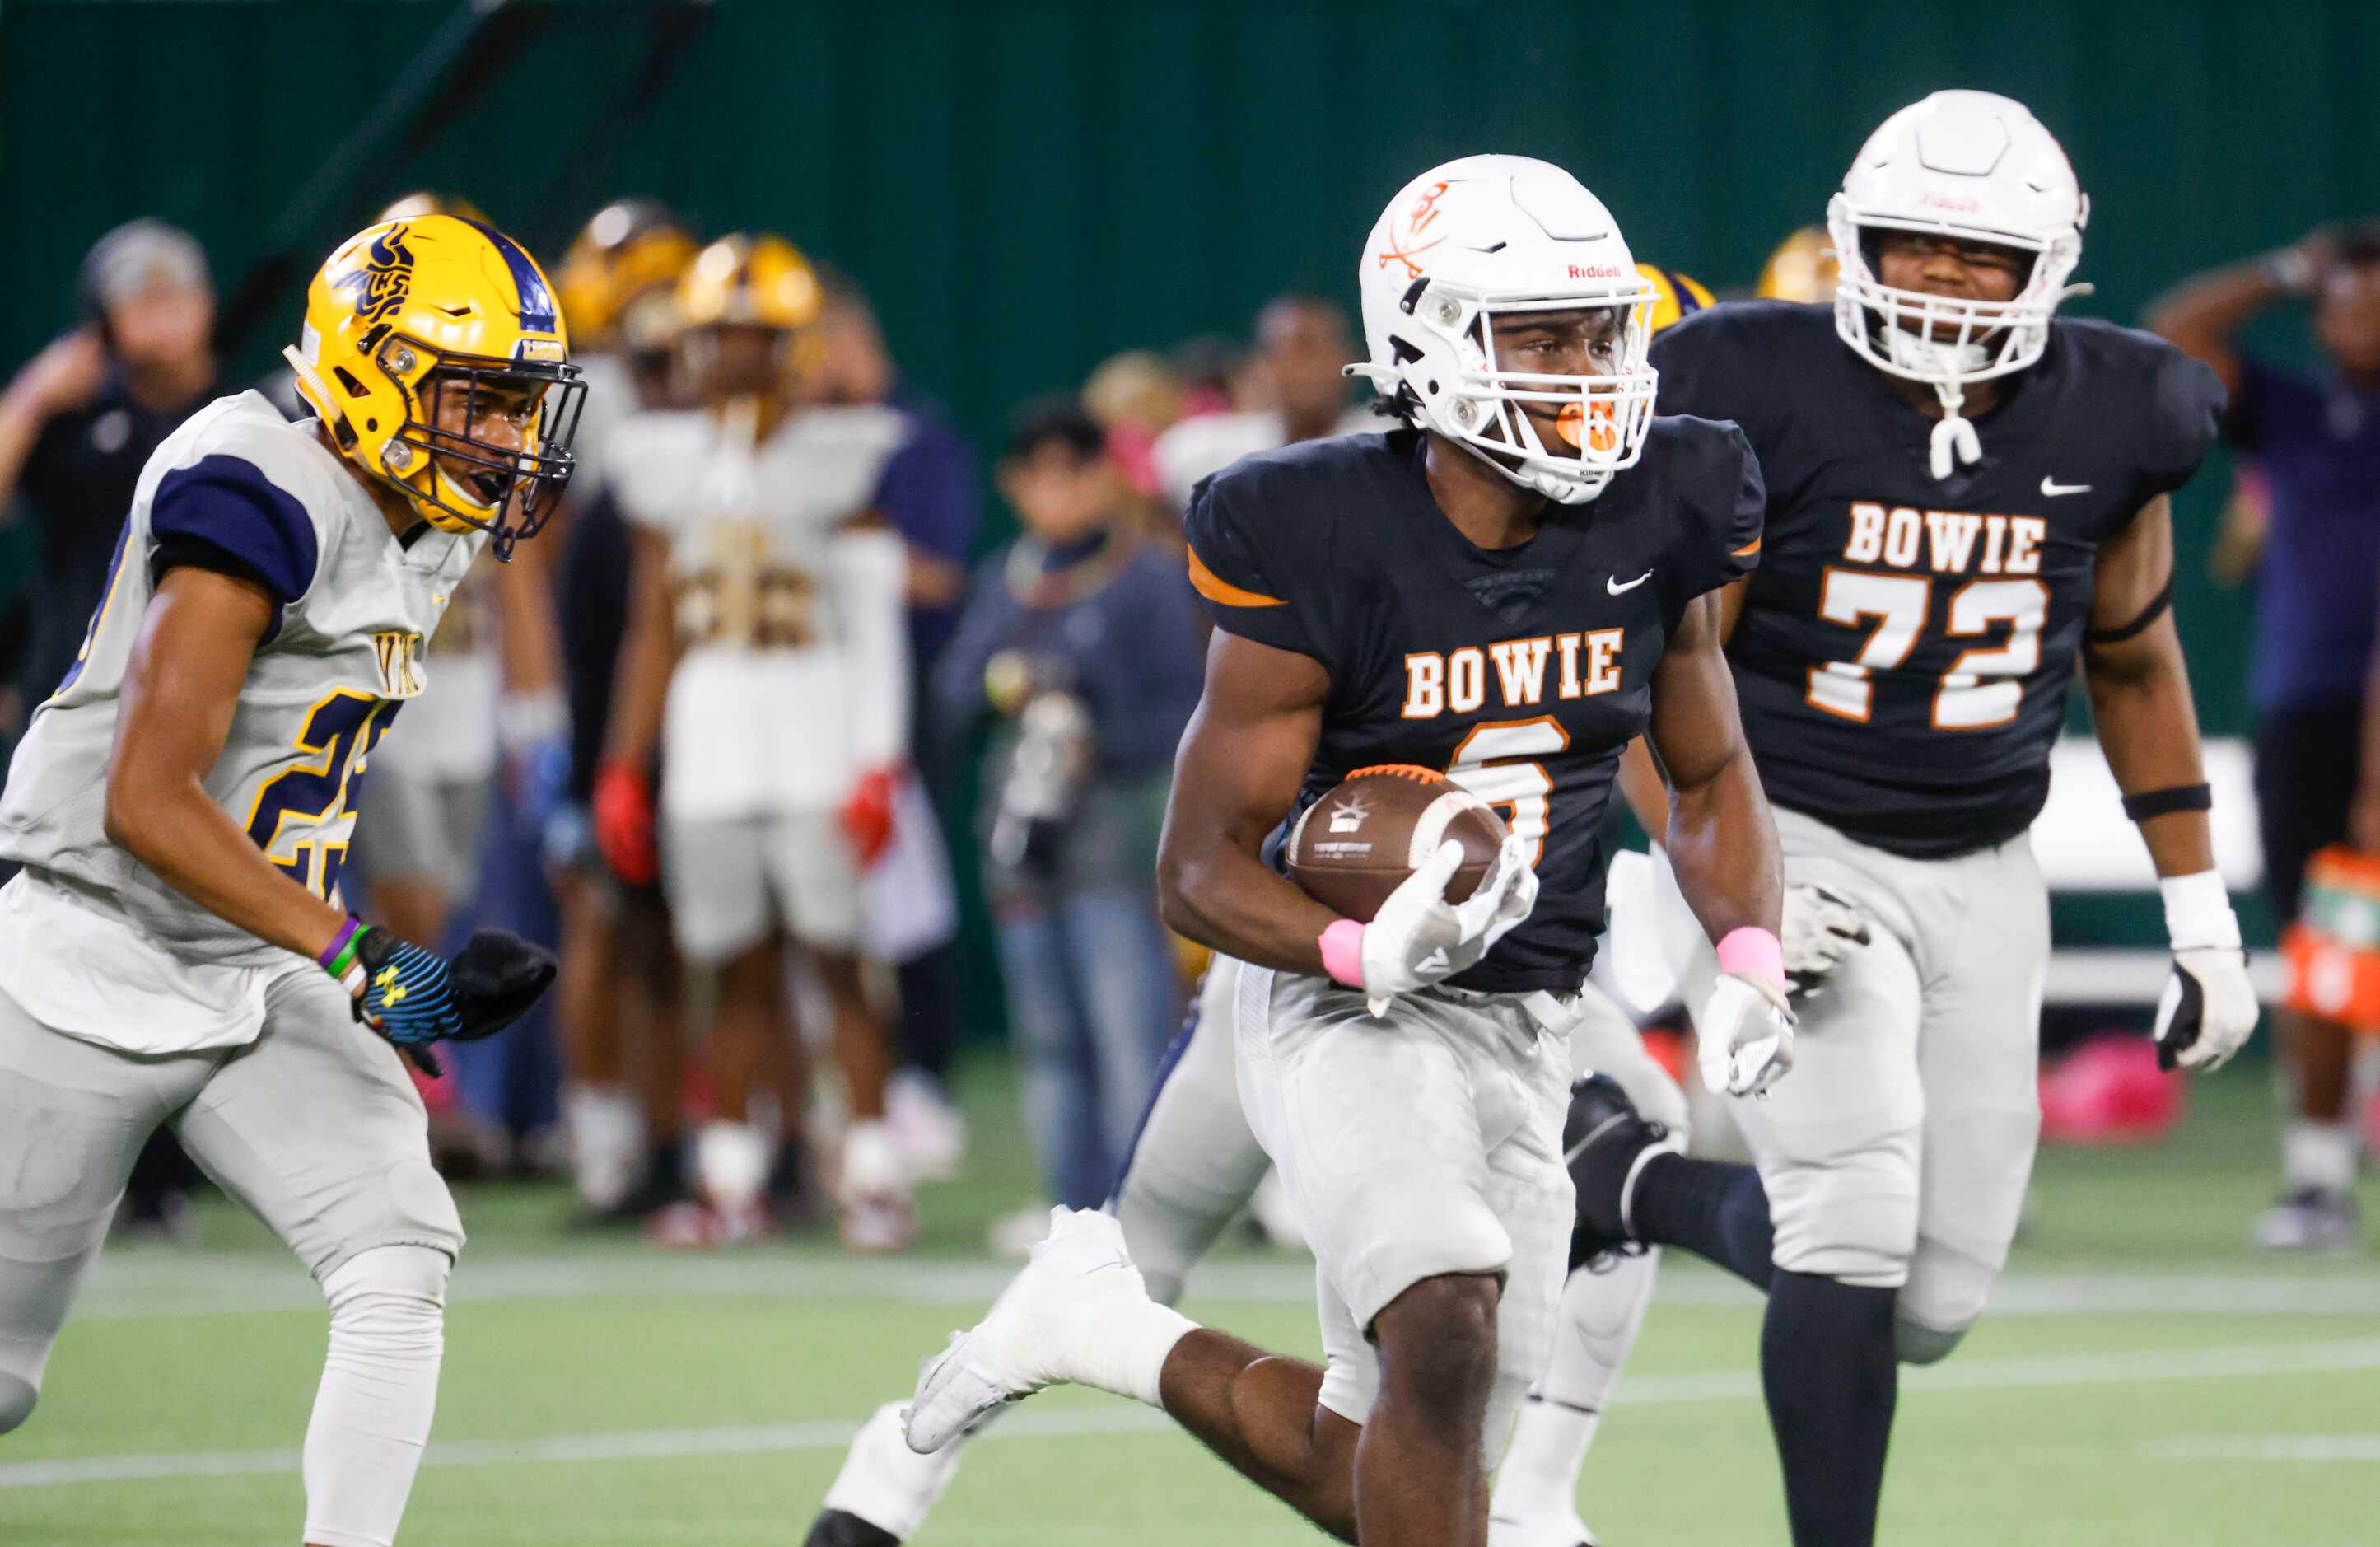 James Bowie High’s Darrion Bowers (6) runs for a touchdown during the first half of a...